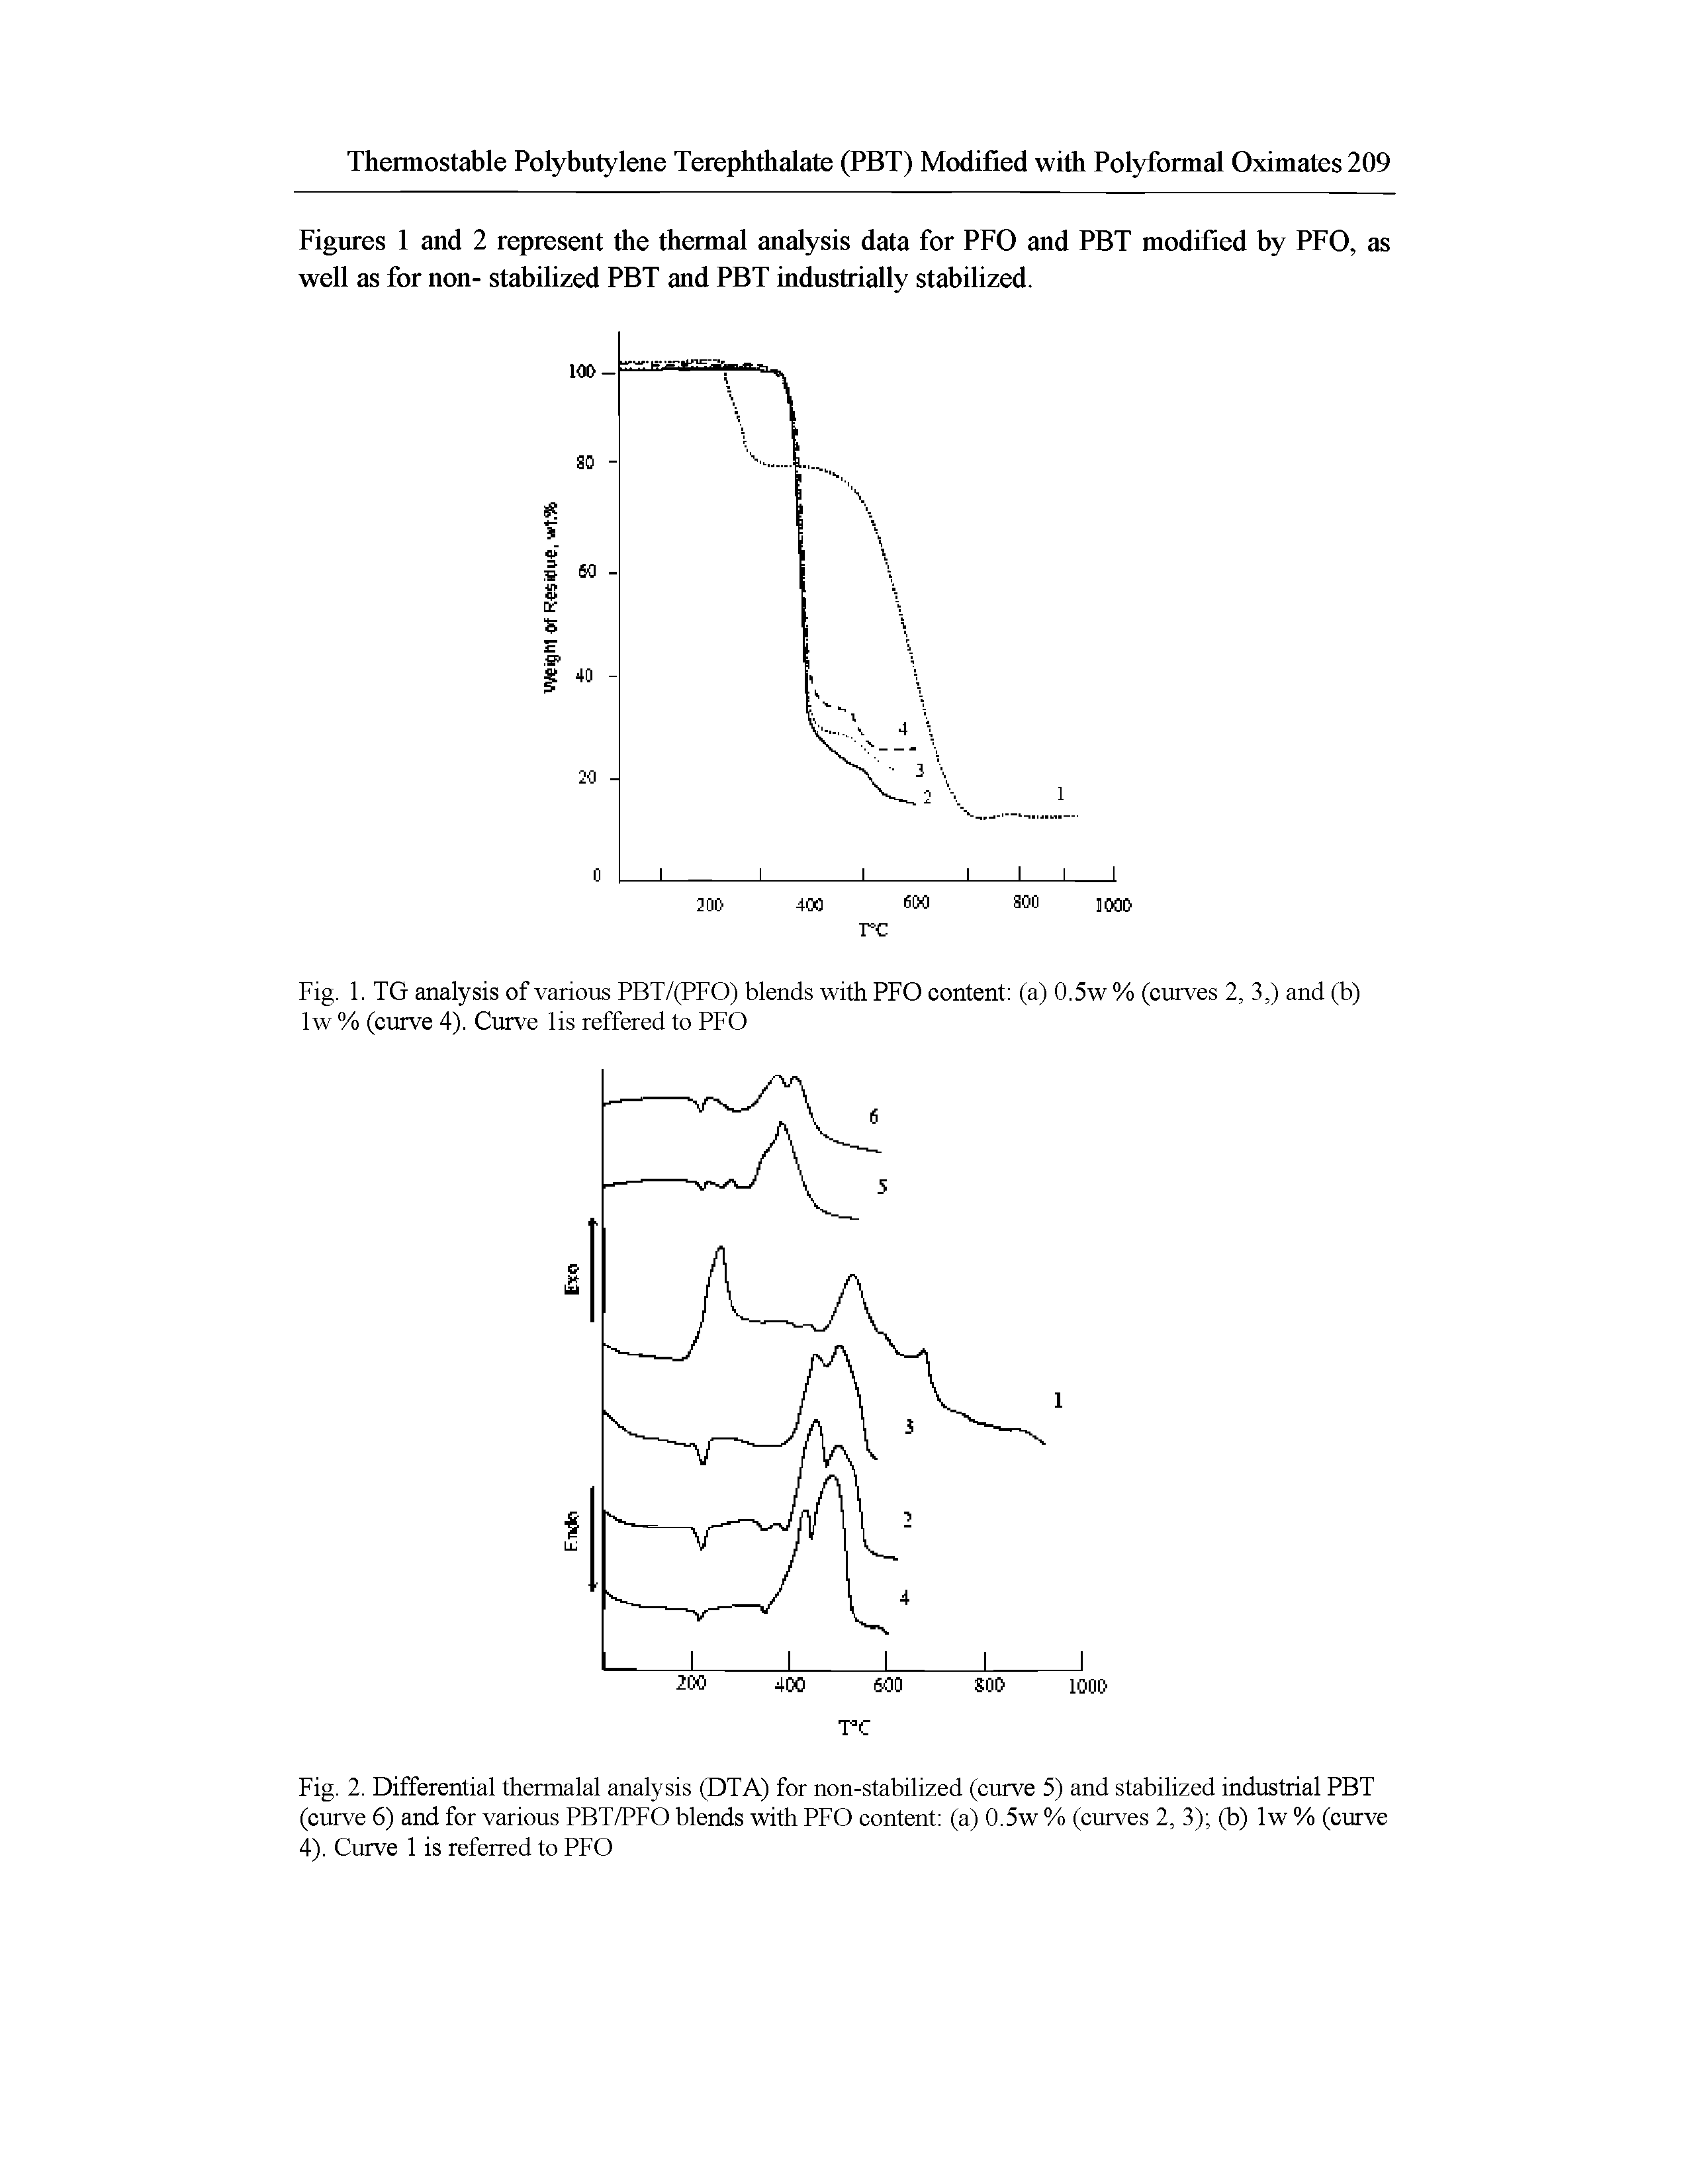 Figures 1 and 2 represent the thermal analysis data for PFO and PBT modified by PFO, as well as for non- stabilized PBT and PBT industrially stabilized.